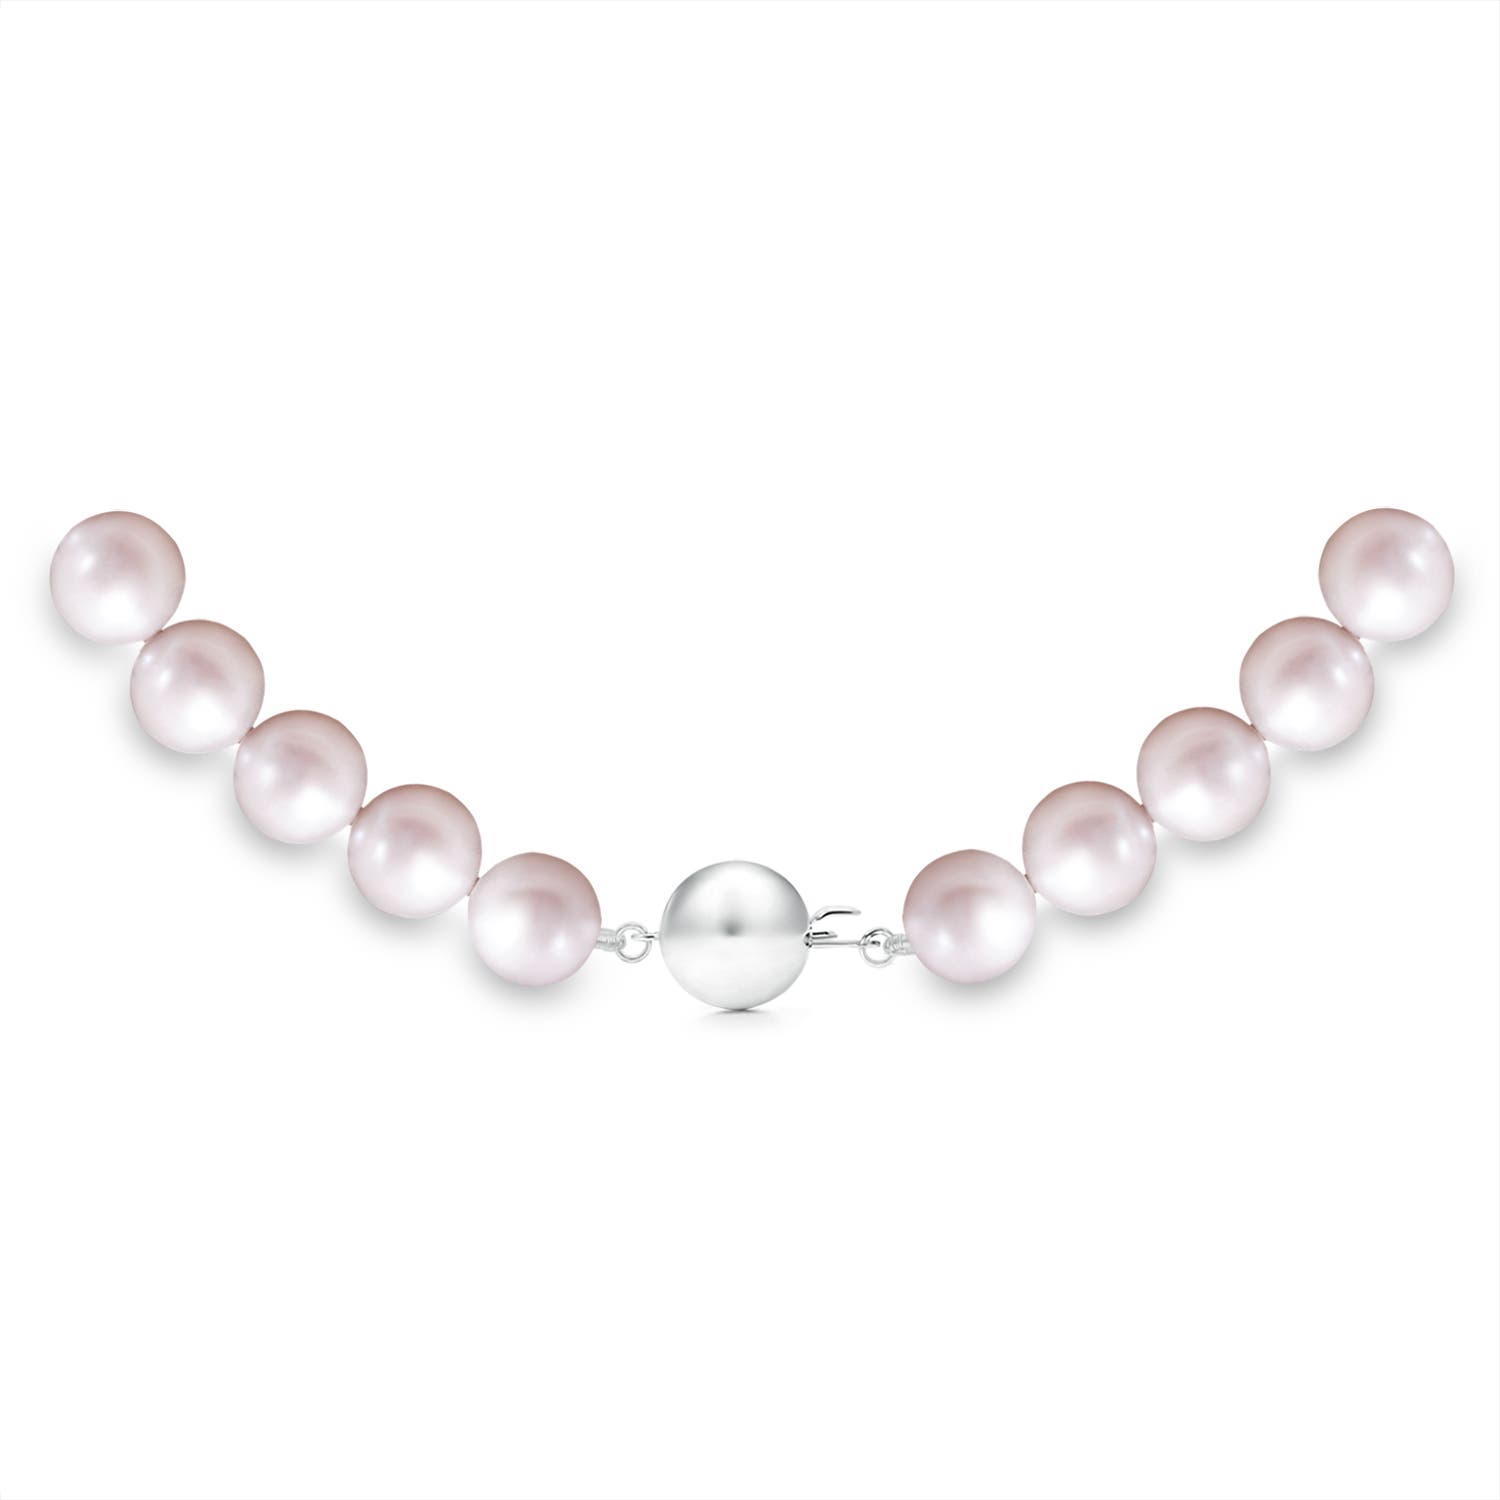 6mm-7mm Triple Strand White Freshwater Pearl Necklace | New Zealand Pearl